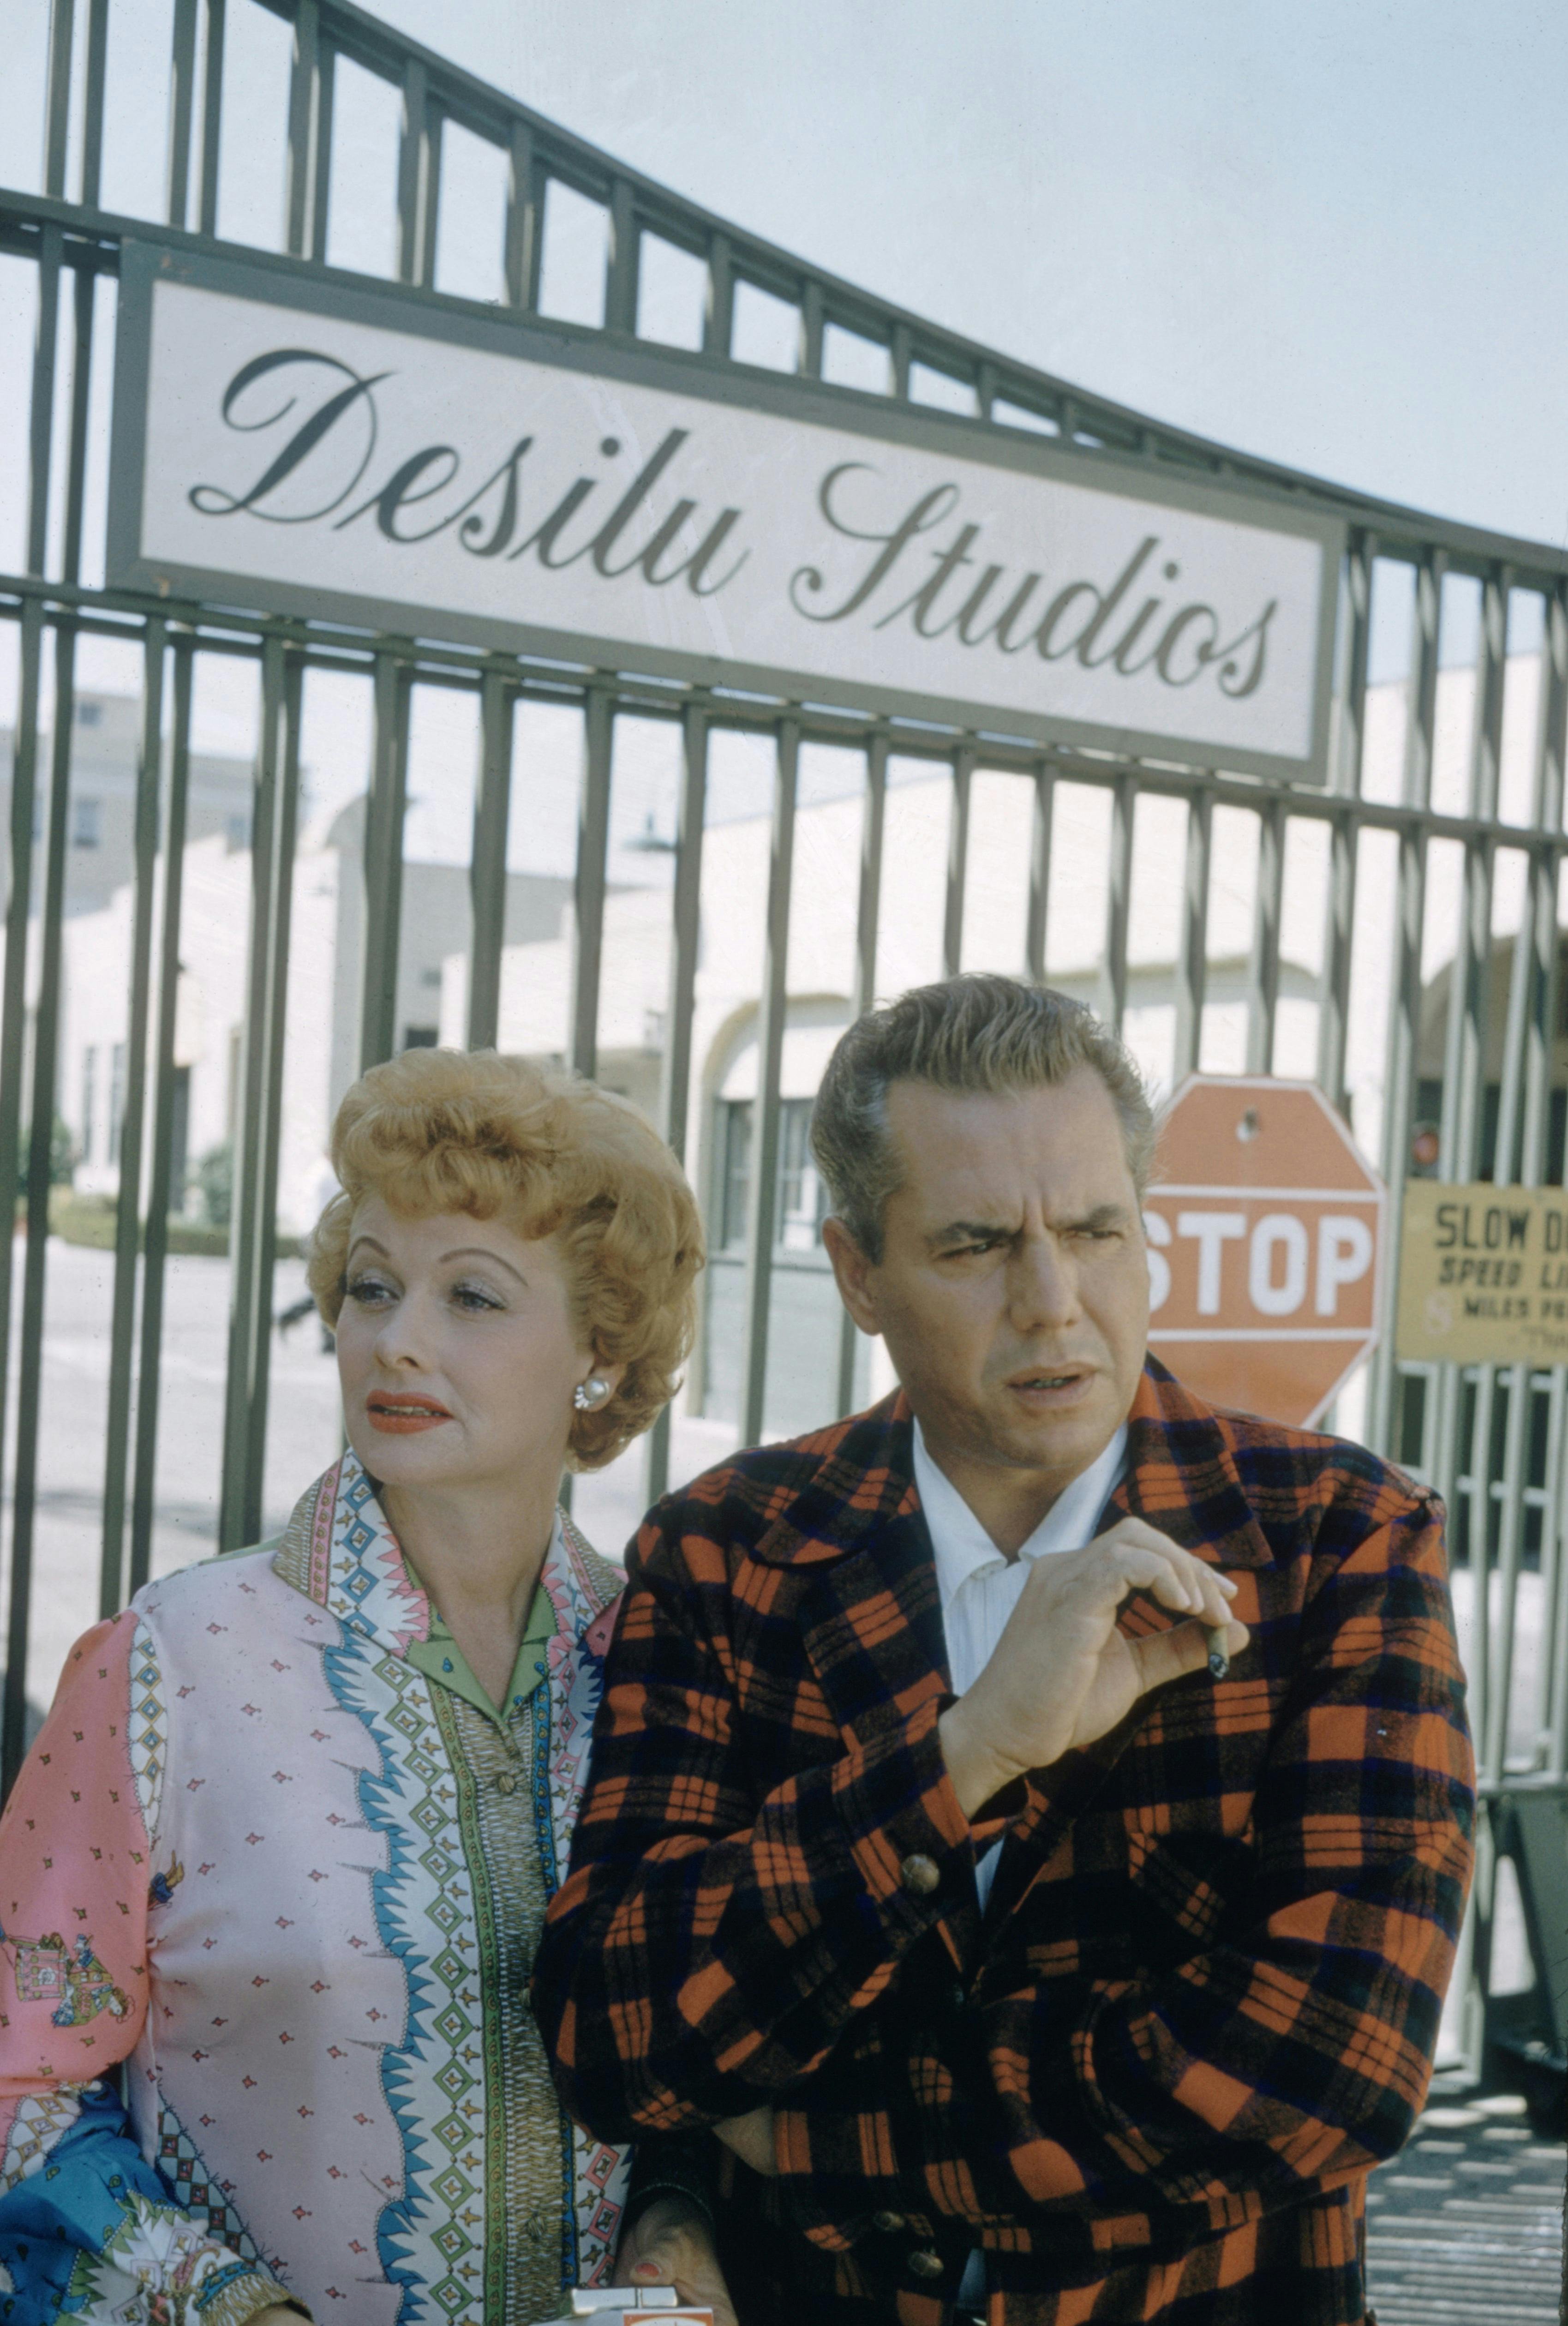 Lucille Ball and Desi Arnaz (pictured smoking) in front of Desilu Studios